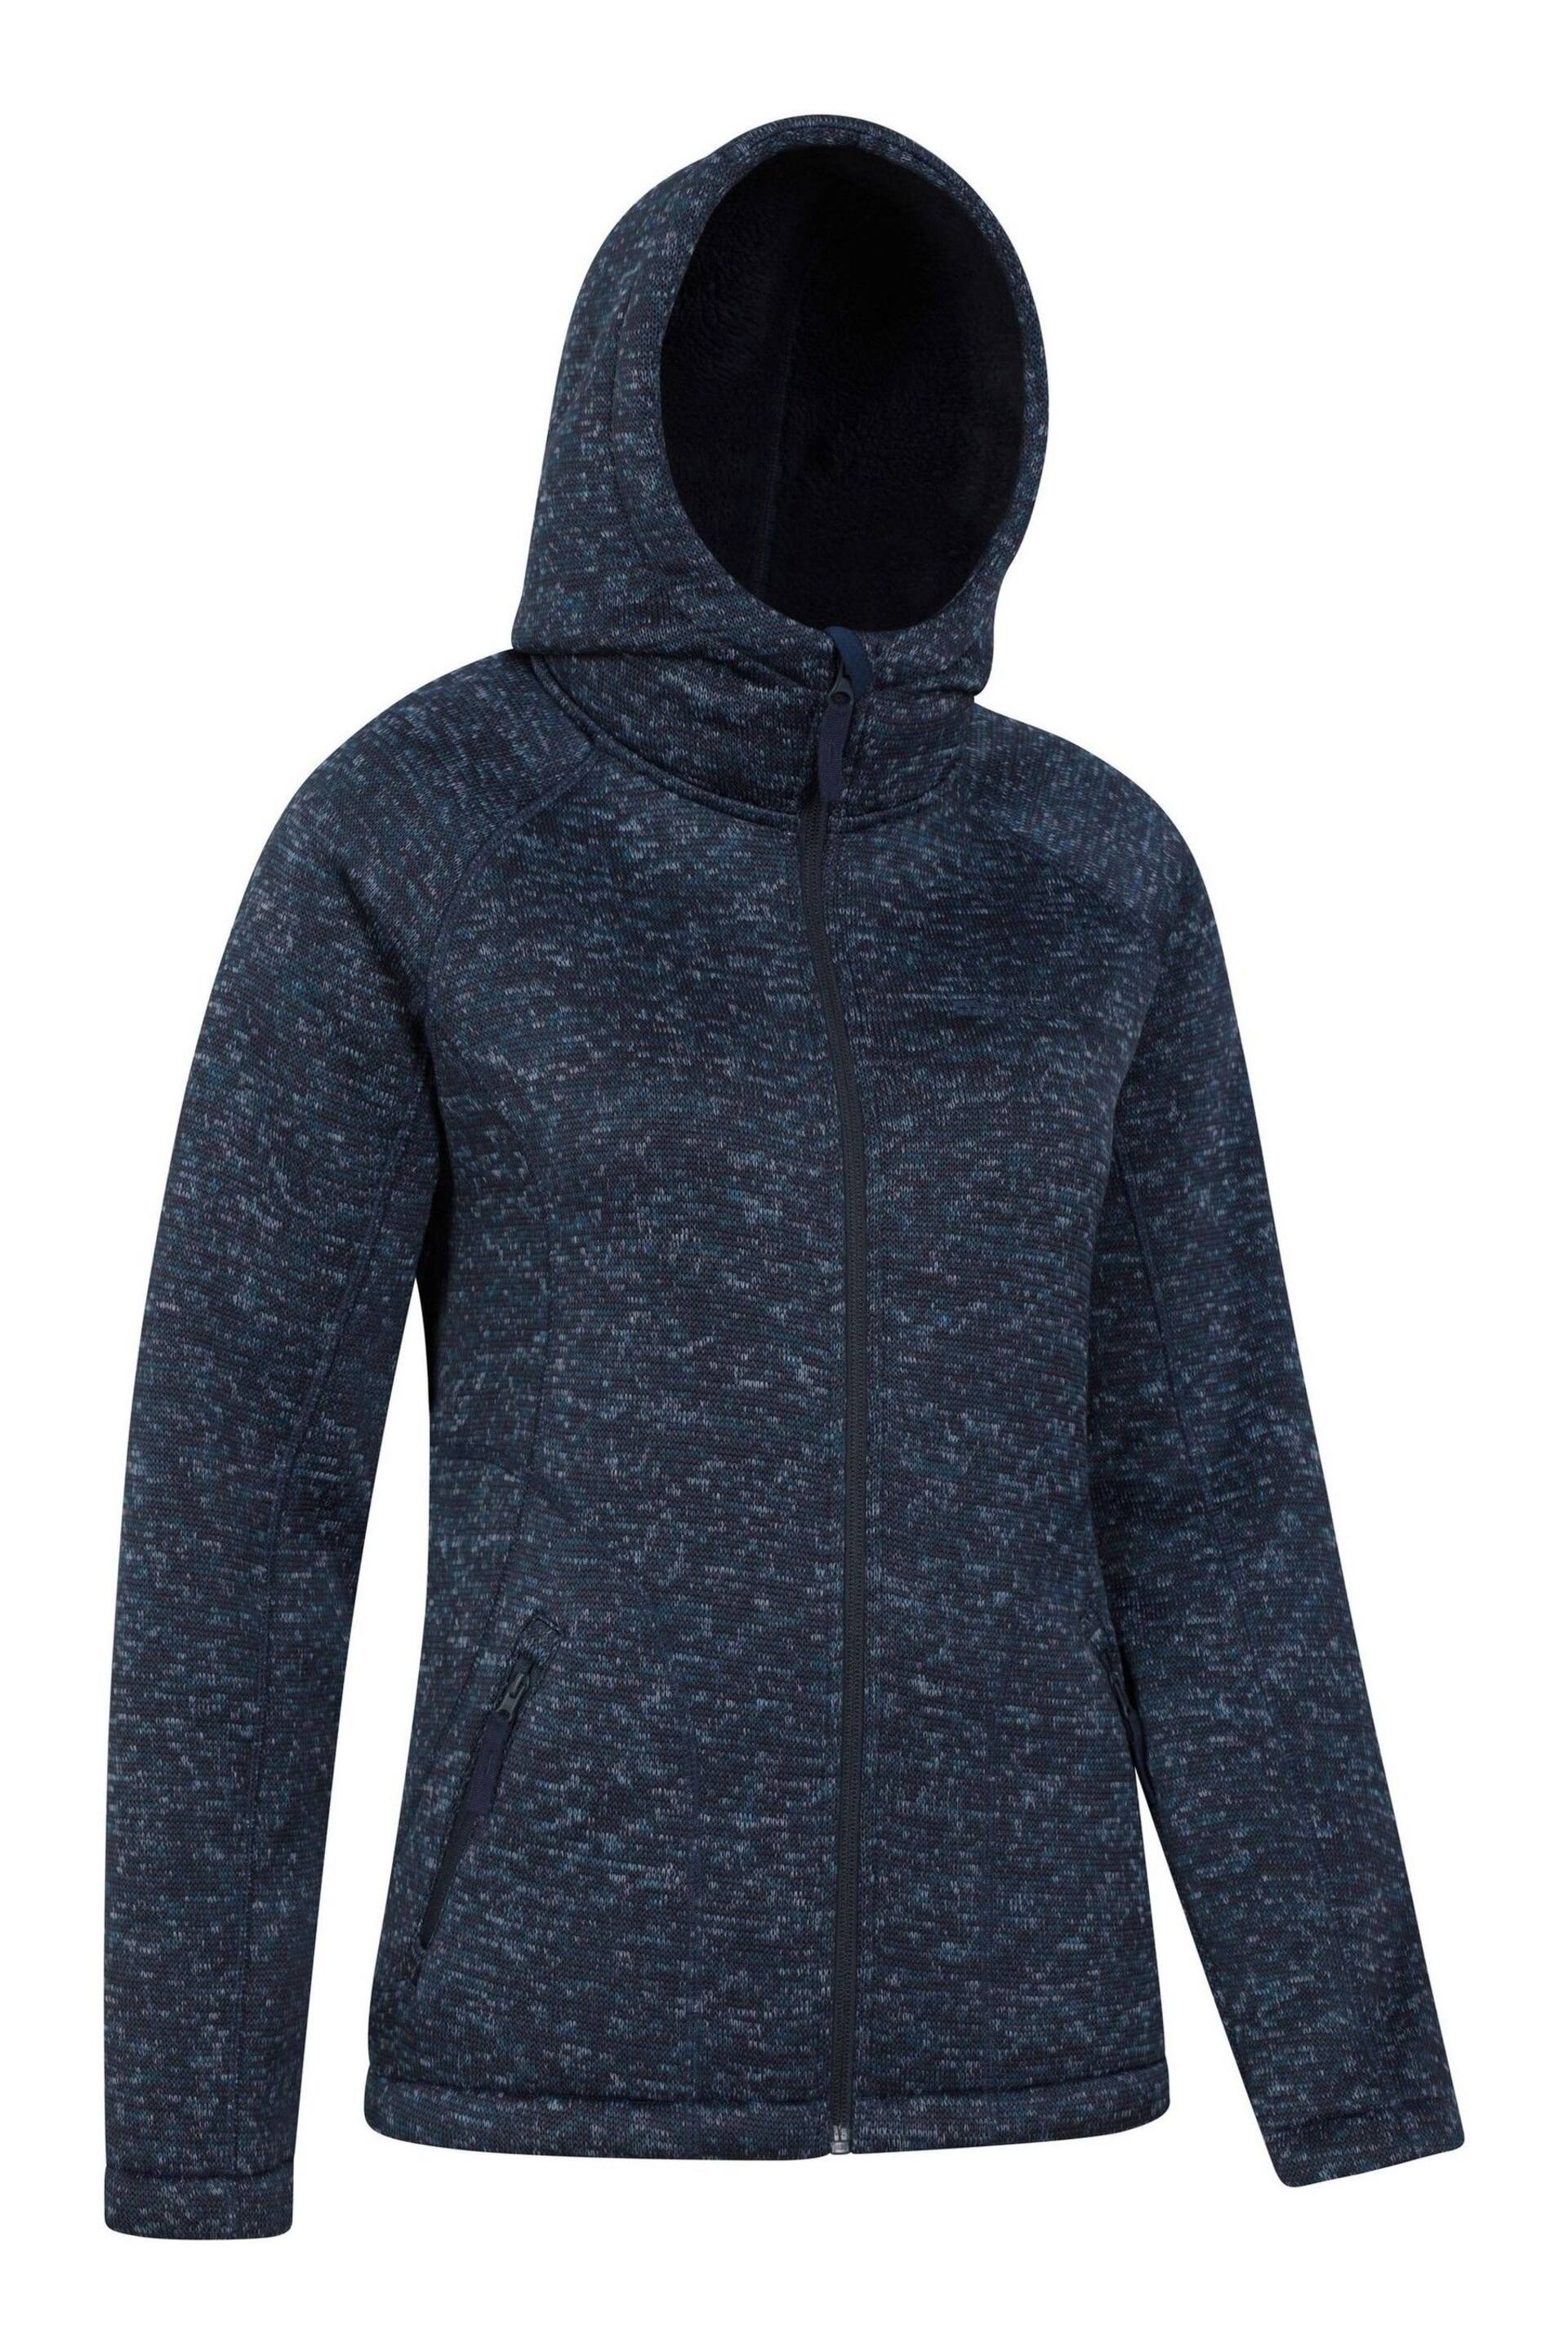 Mountain Warehouse Navy Blue Nevis Sherpa Lined Hoodie - Image 2 of 5